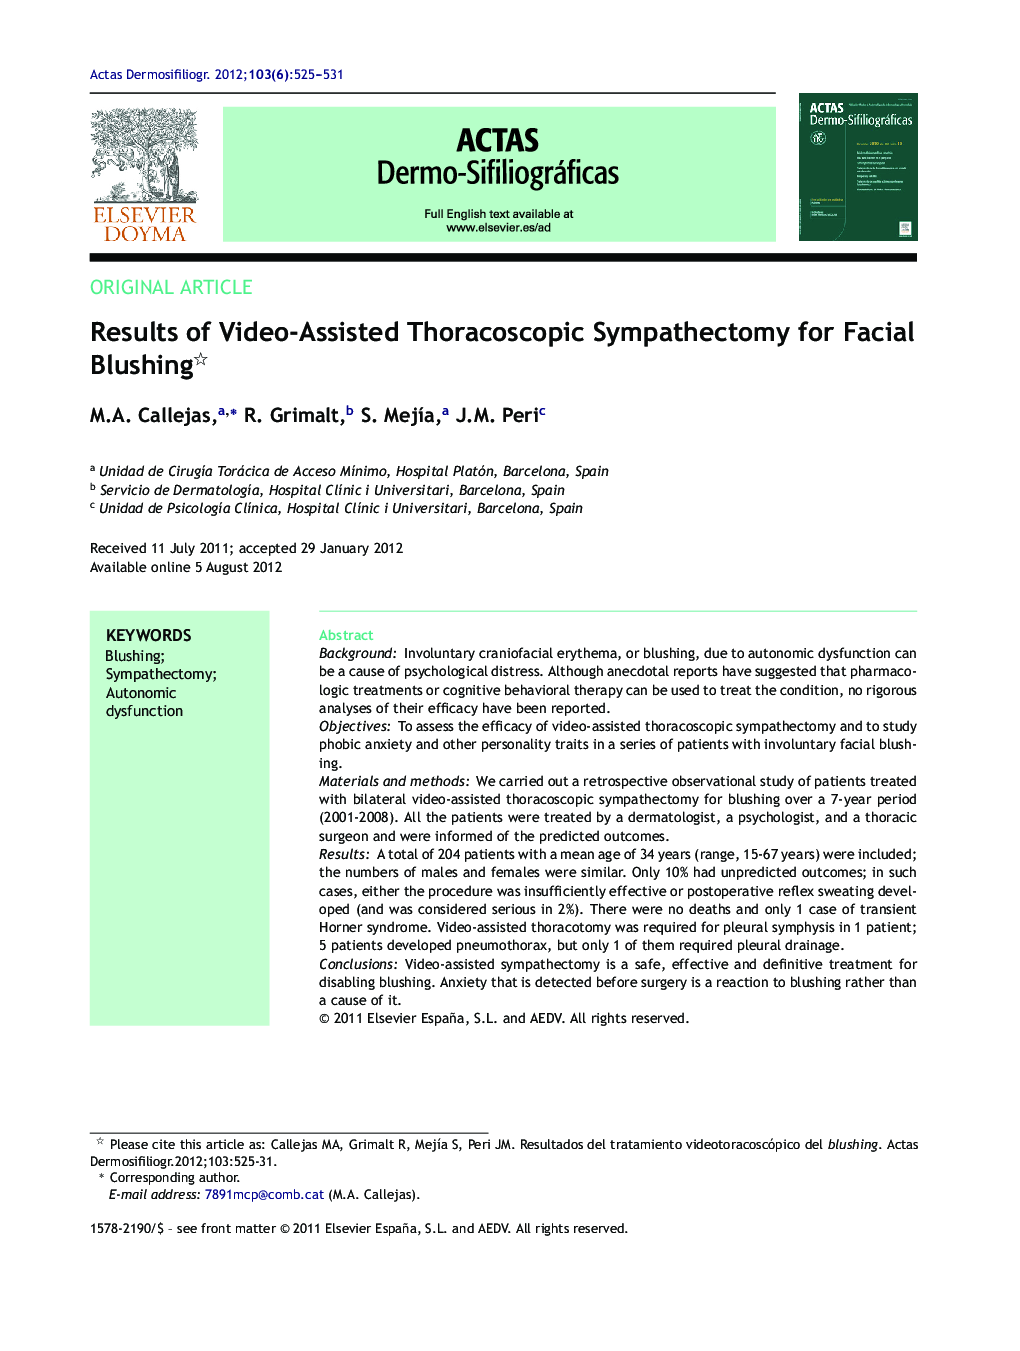 Results of Video-Assisted Thoracoscopic Sympathectomy for Facial Blushing